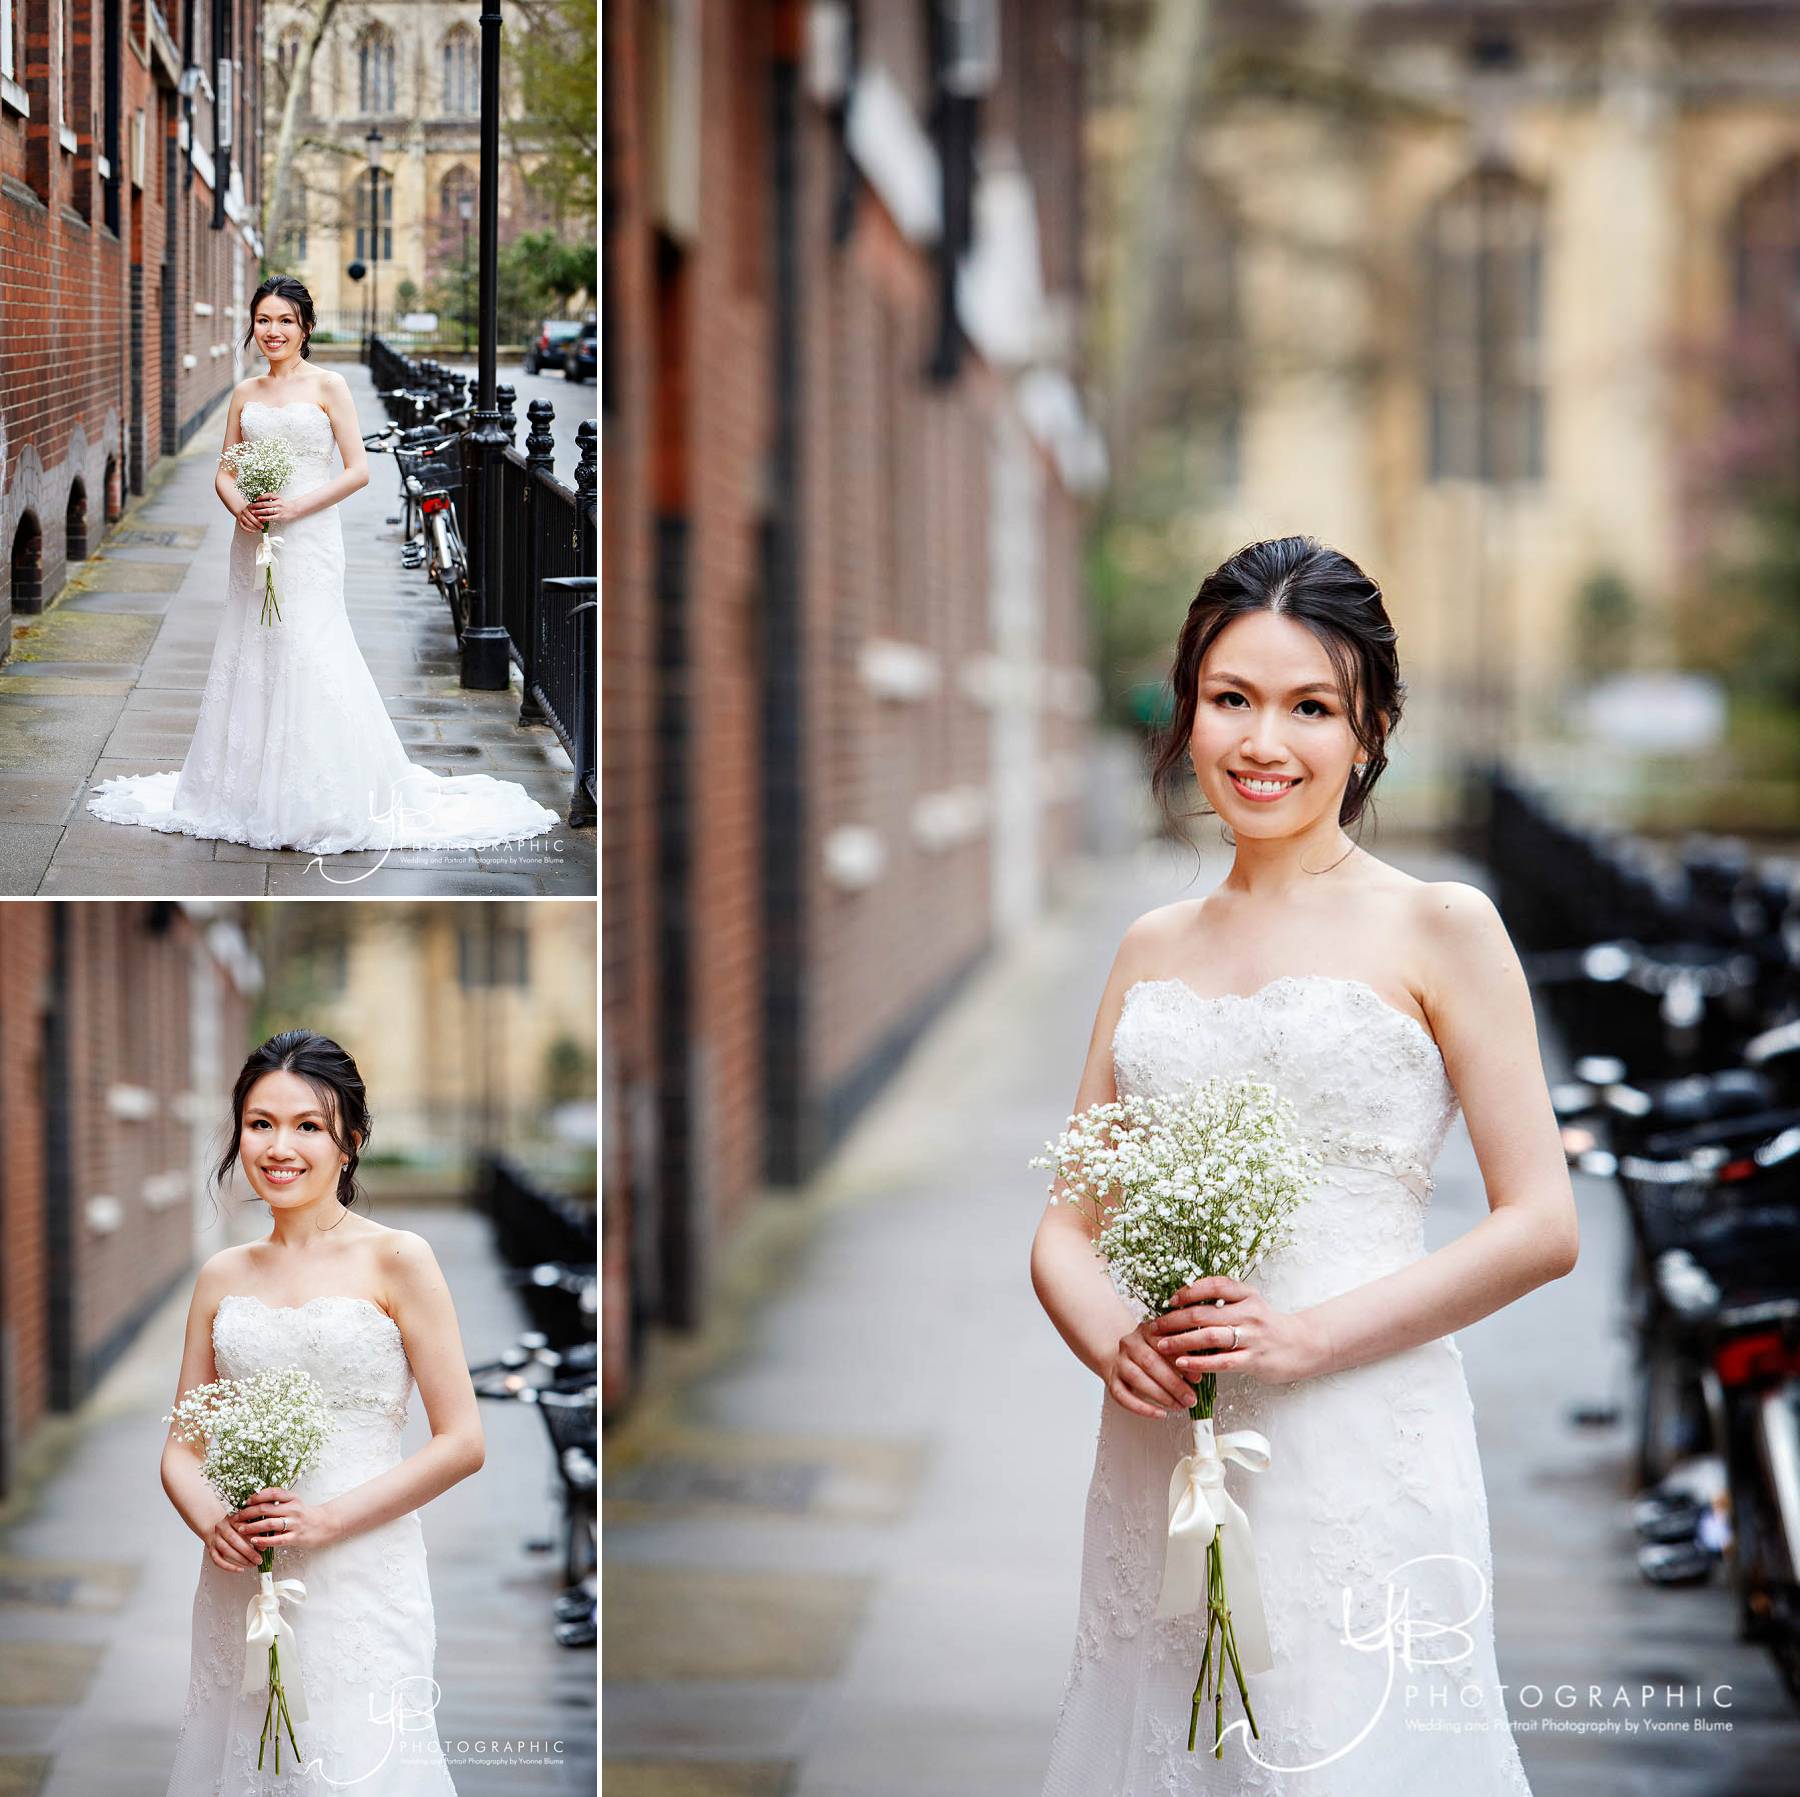 Chinese Bride in London Wedding Portrait by YBPHOTOGRAPHIC